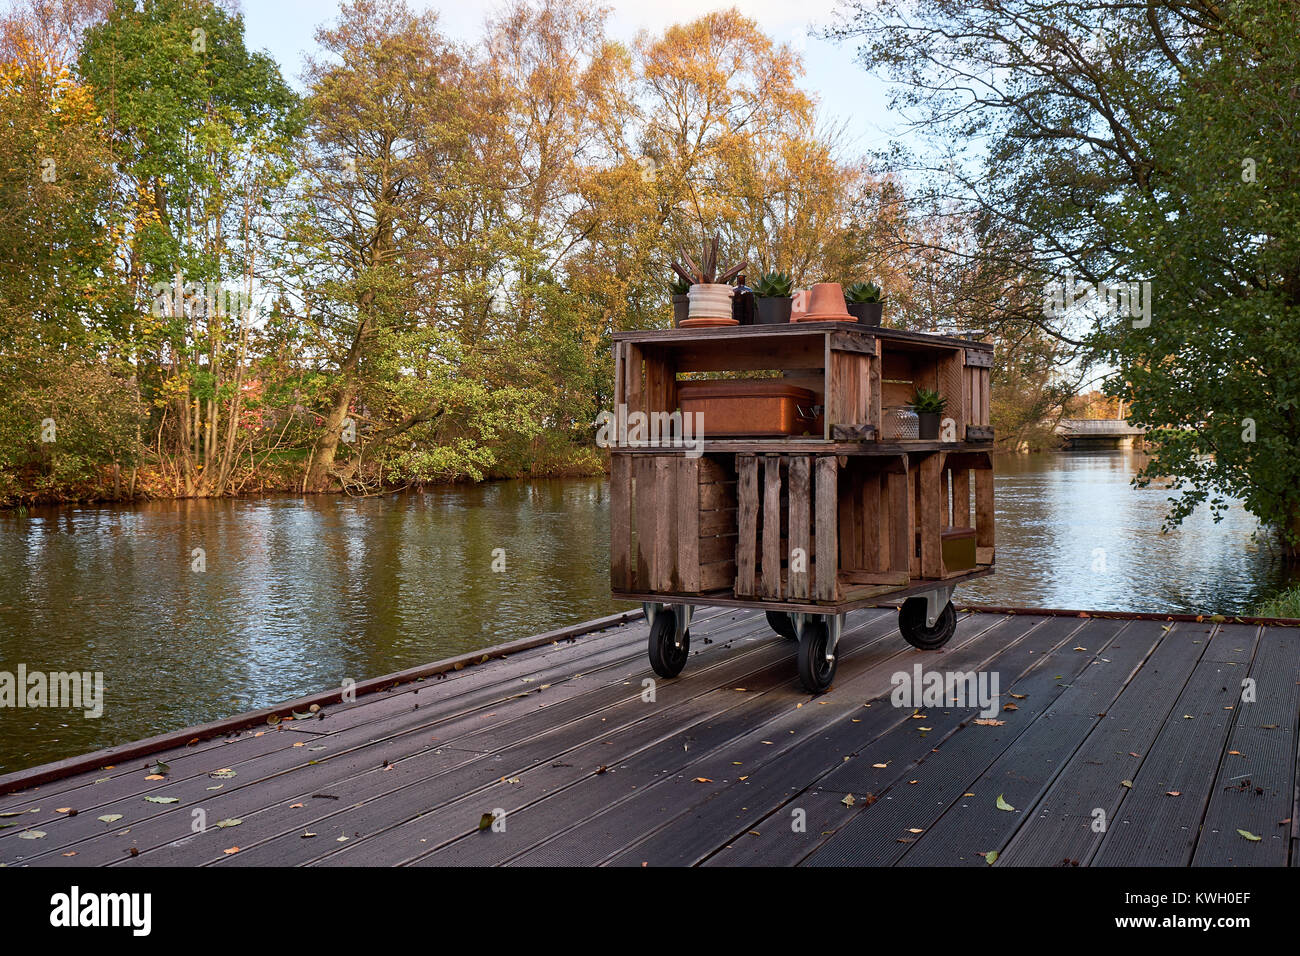 Home made storage furniture of wood boxes standing on a wooden jetty by a river Stock Photo